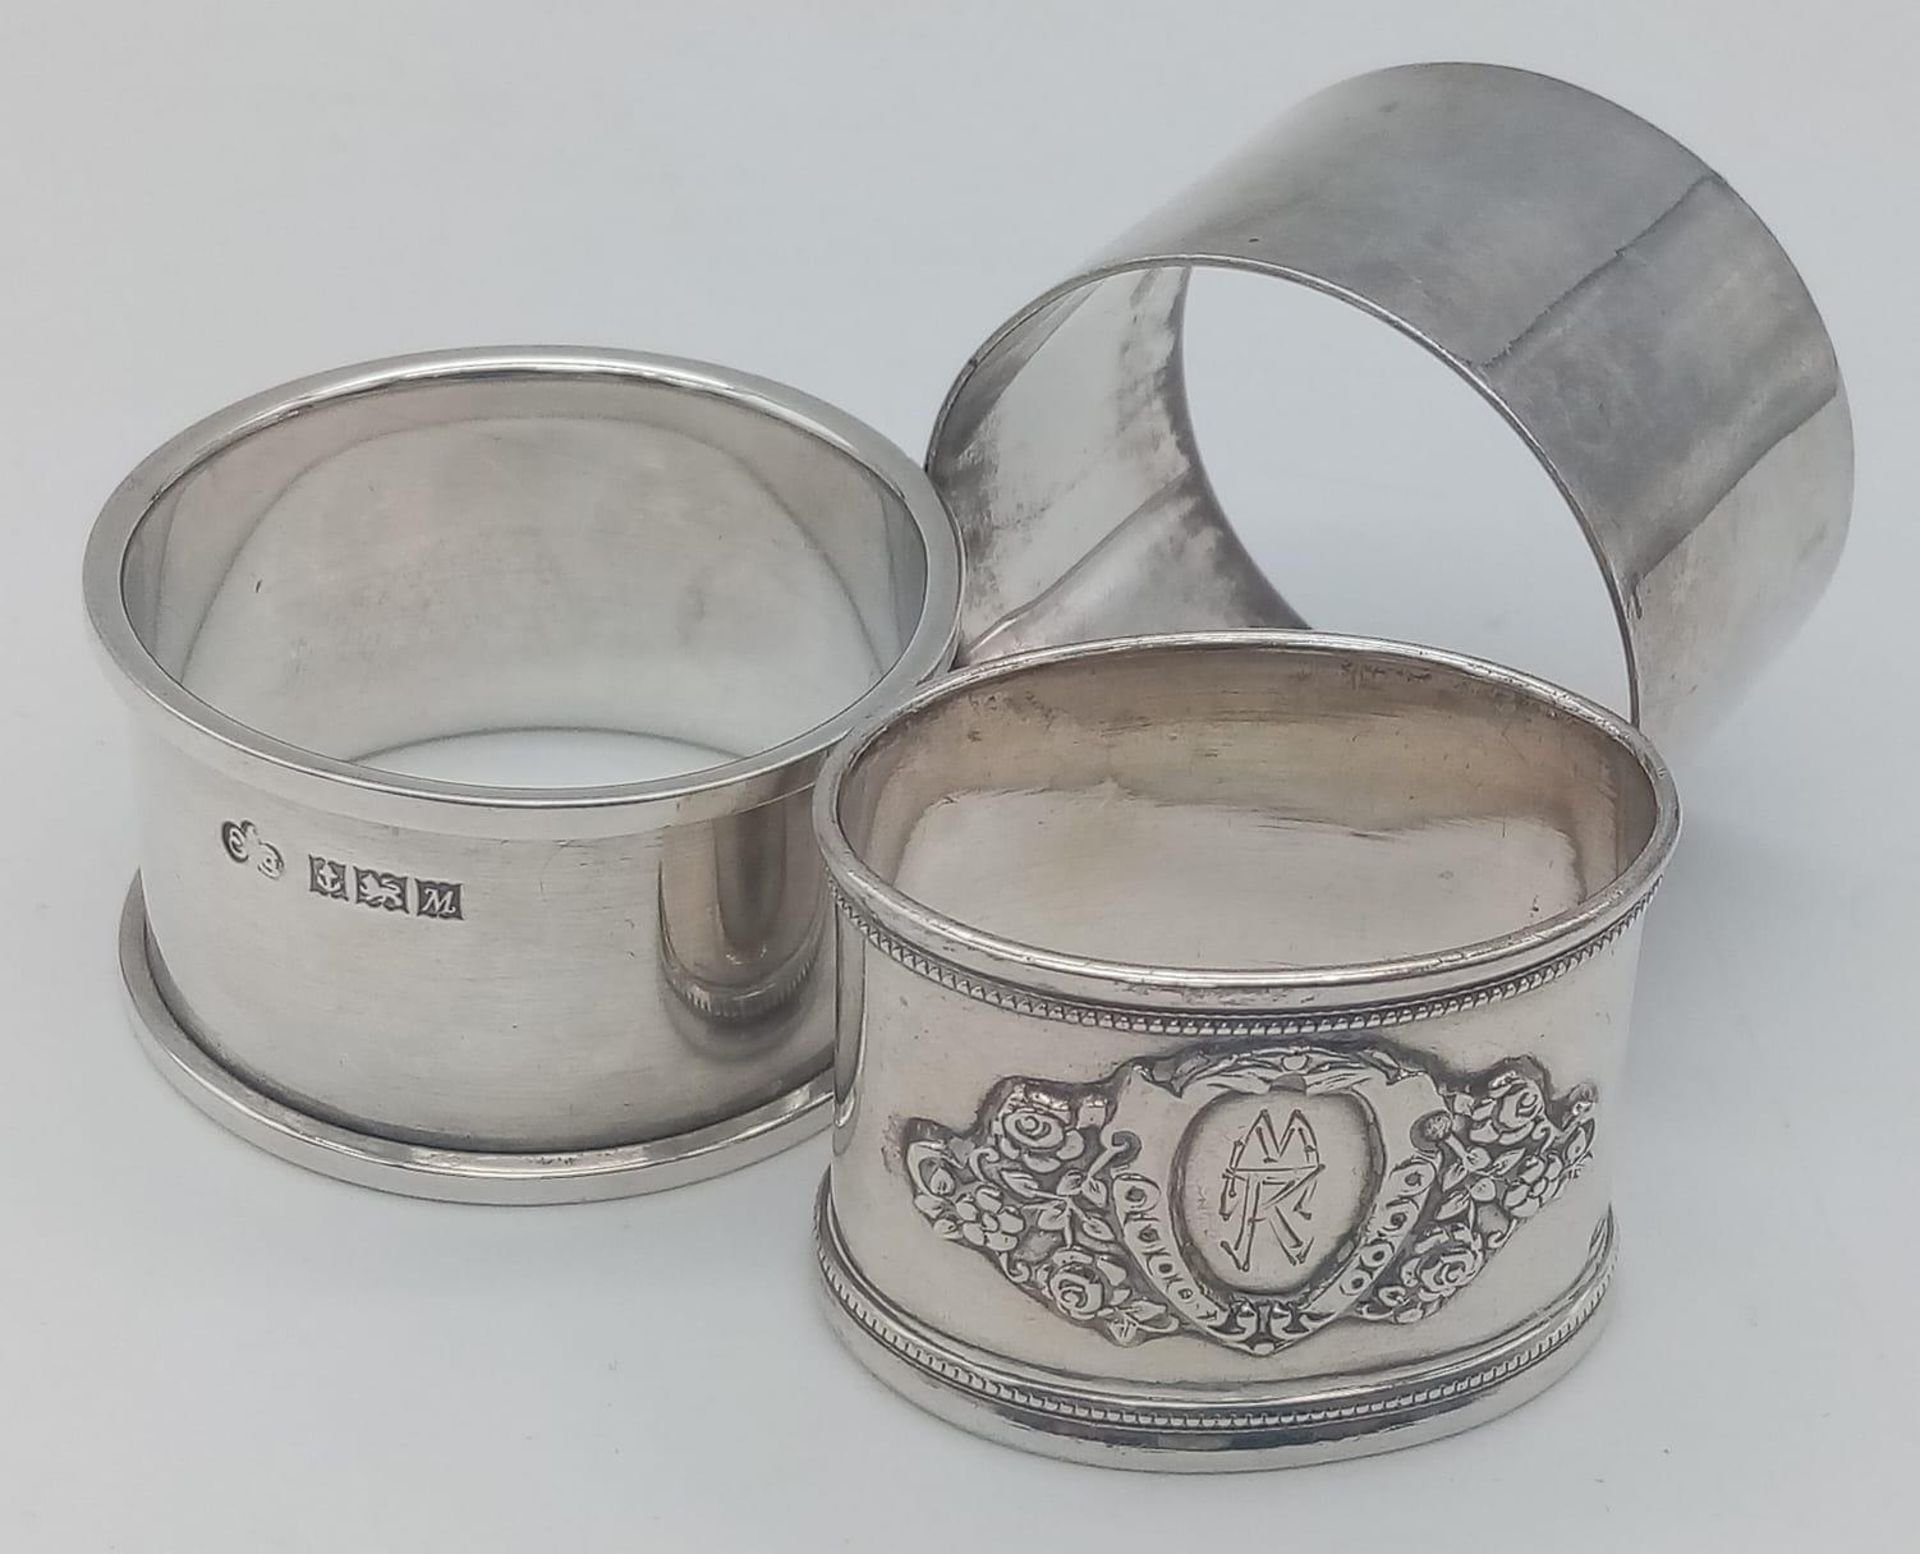 A collection of 3 vintage sterling silver napkin holders include 2X circular with full Birmingham